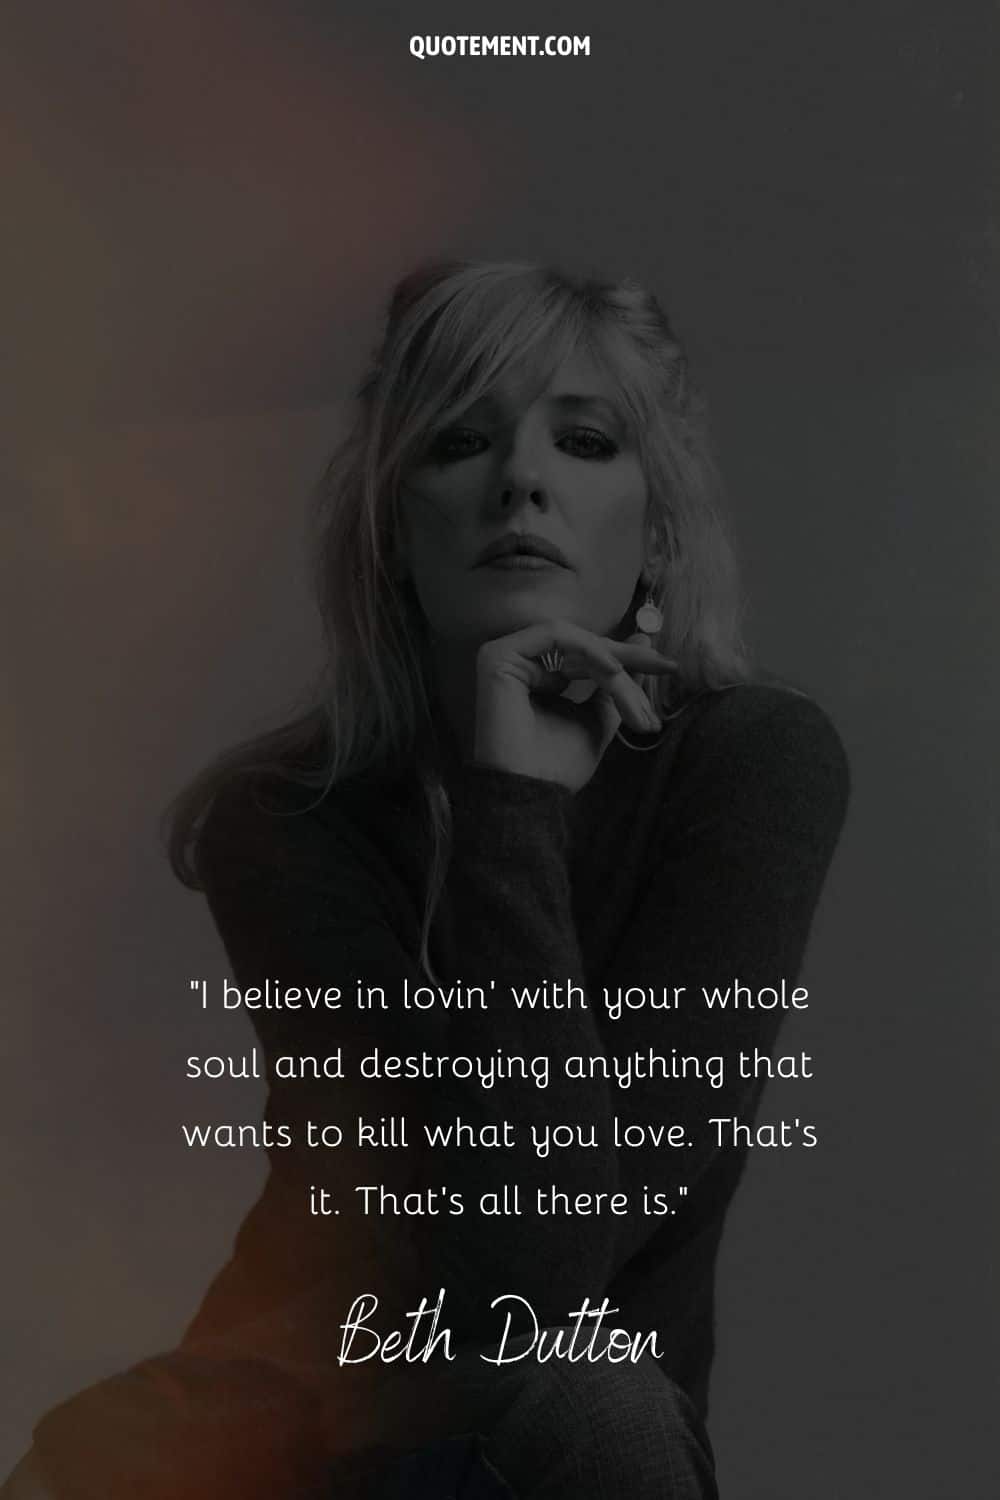 Beth Dutton's image with her hand on her chin representing love quote by Beth Dutton